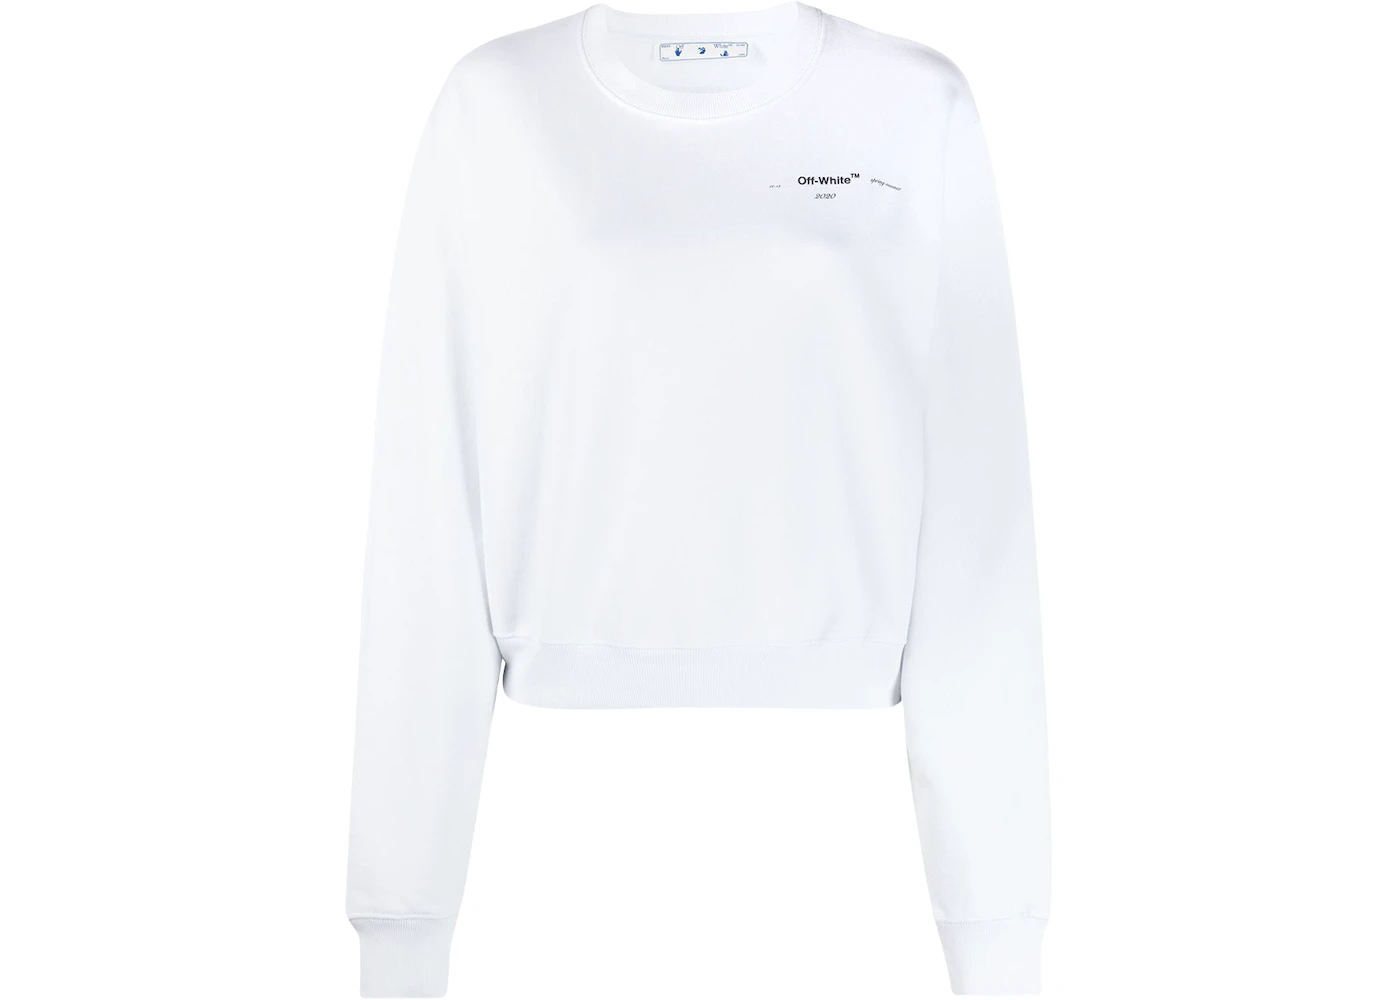 OFF-WHITE Cropped Meteor Palette Sweatshirt White/Multicolor - SS20 - US